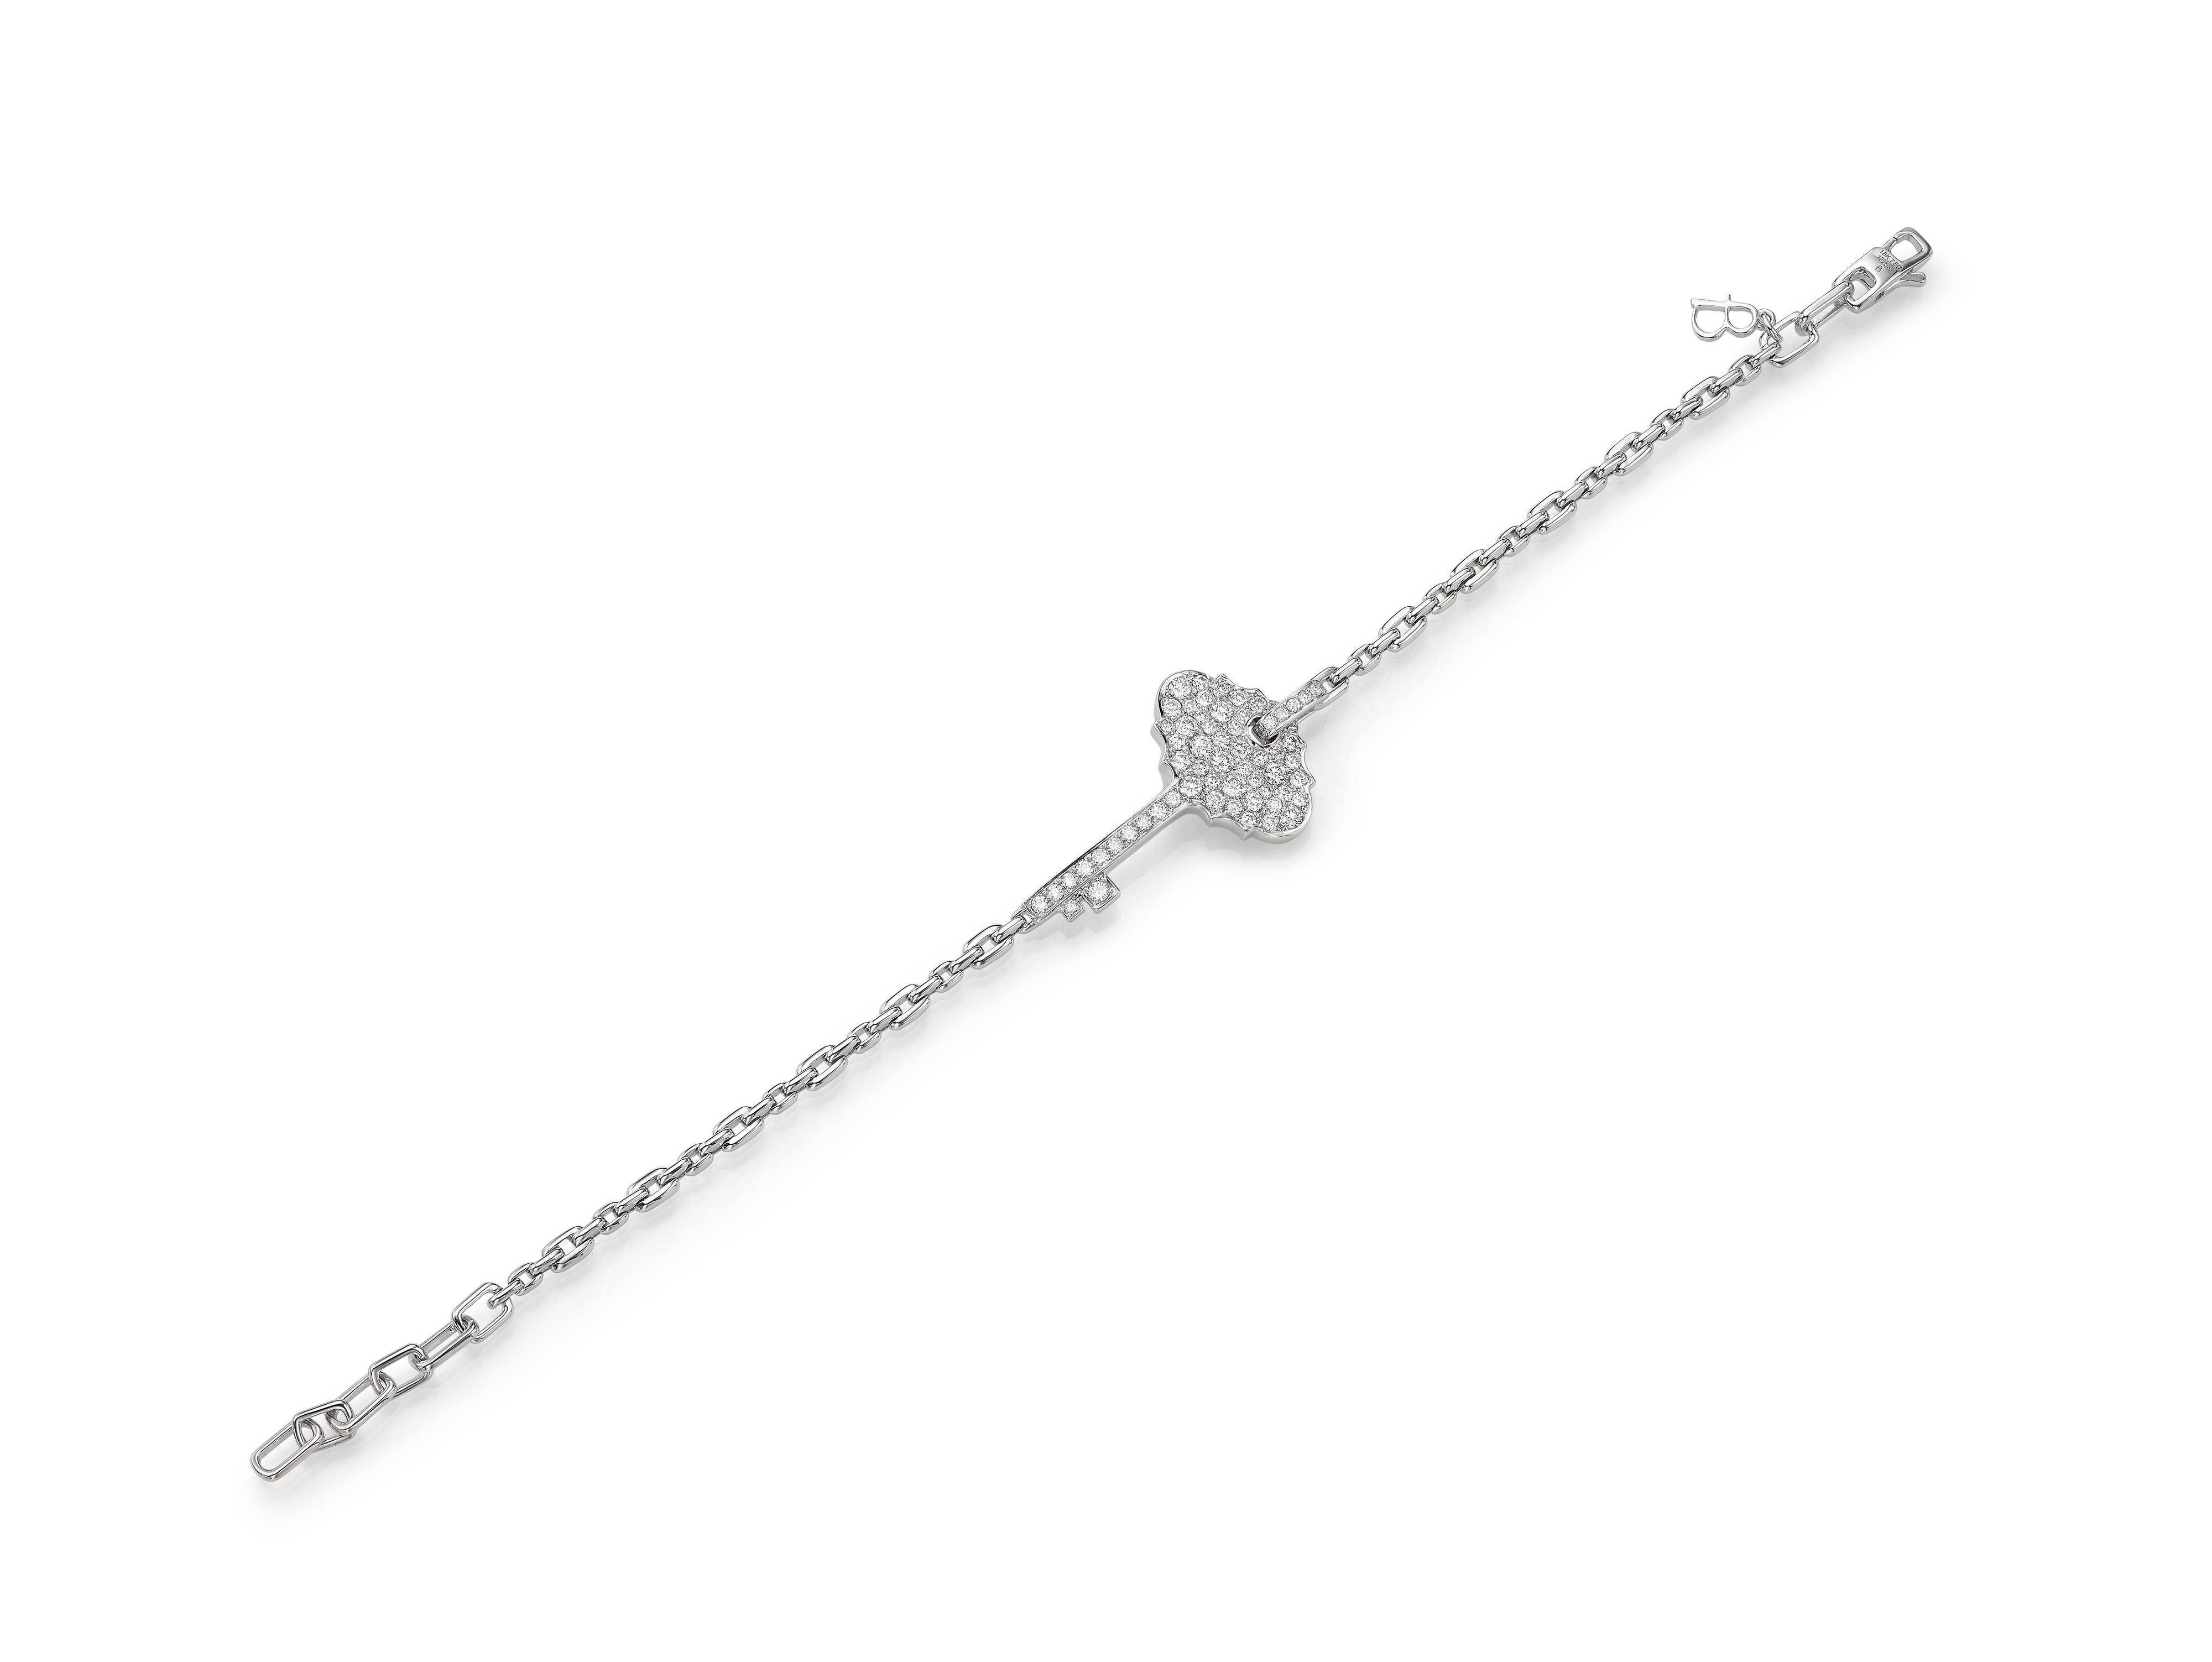 A simple, stackable bracelet that is perfect for every day.  Butani’s 18K white gold bracelet is strung with a key pendant and encrusted with diamonds totaling 0.90 carats.  Adjustable to your preferred length.  Also available in yellow gold and